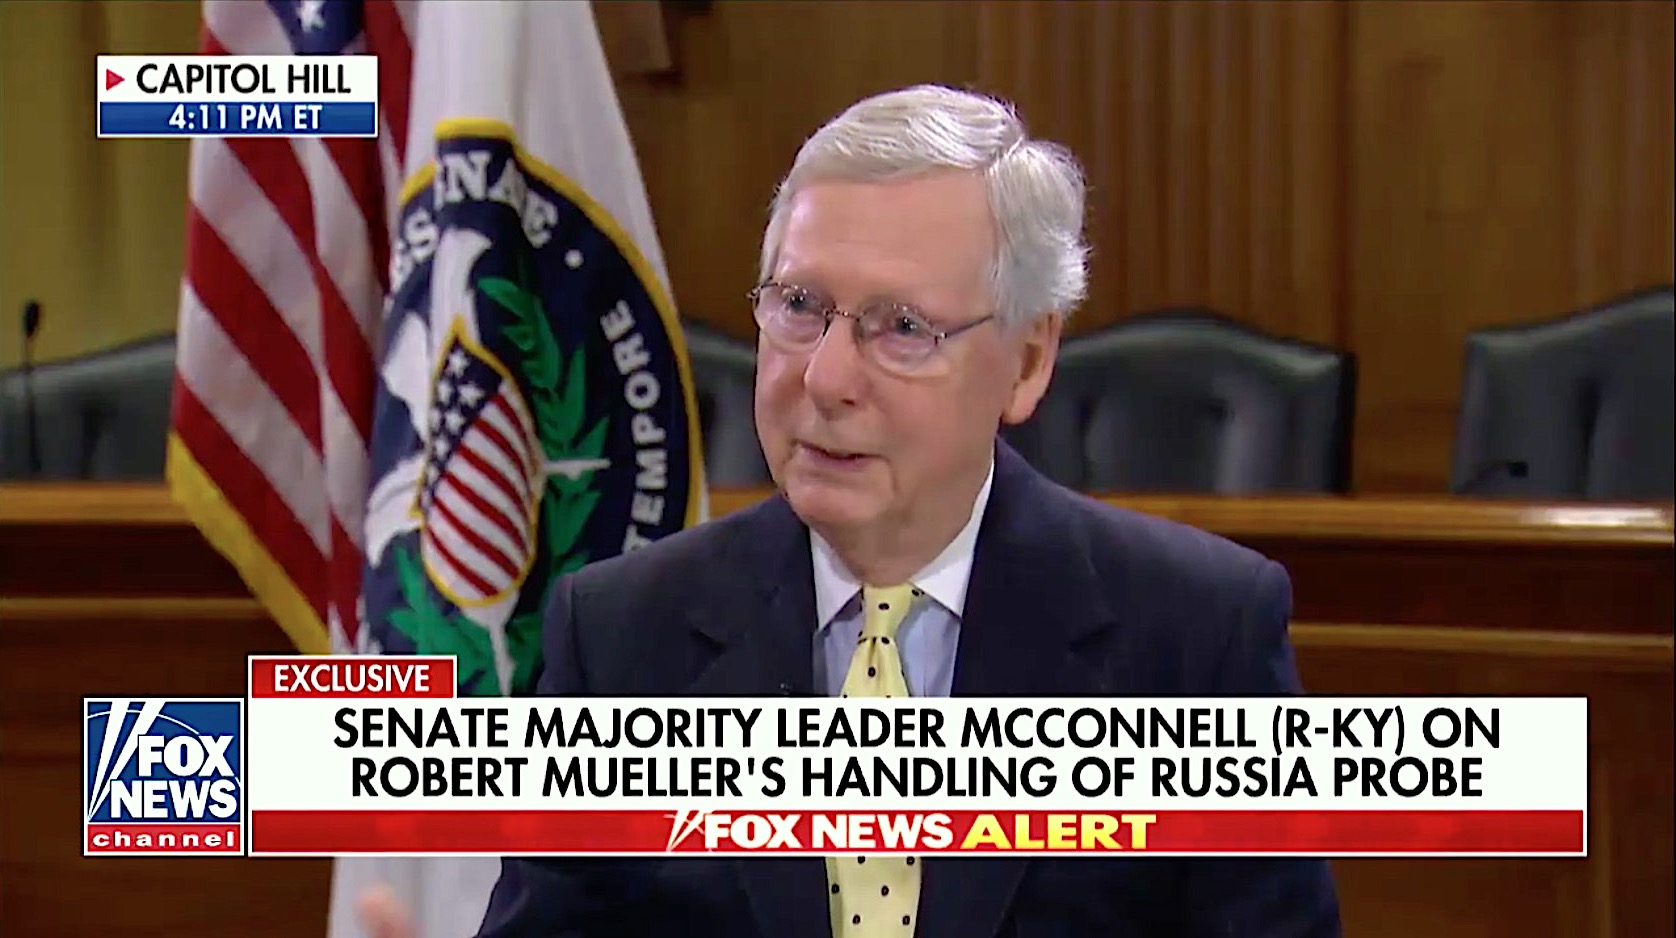 Mitch McConnell shoots down legislation to protect Mueller